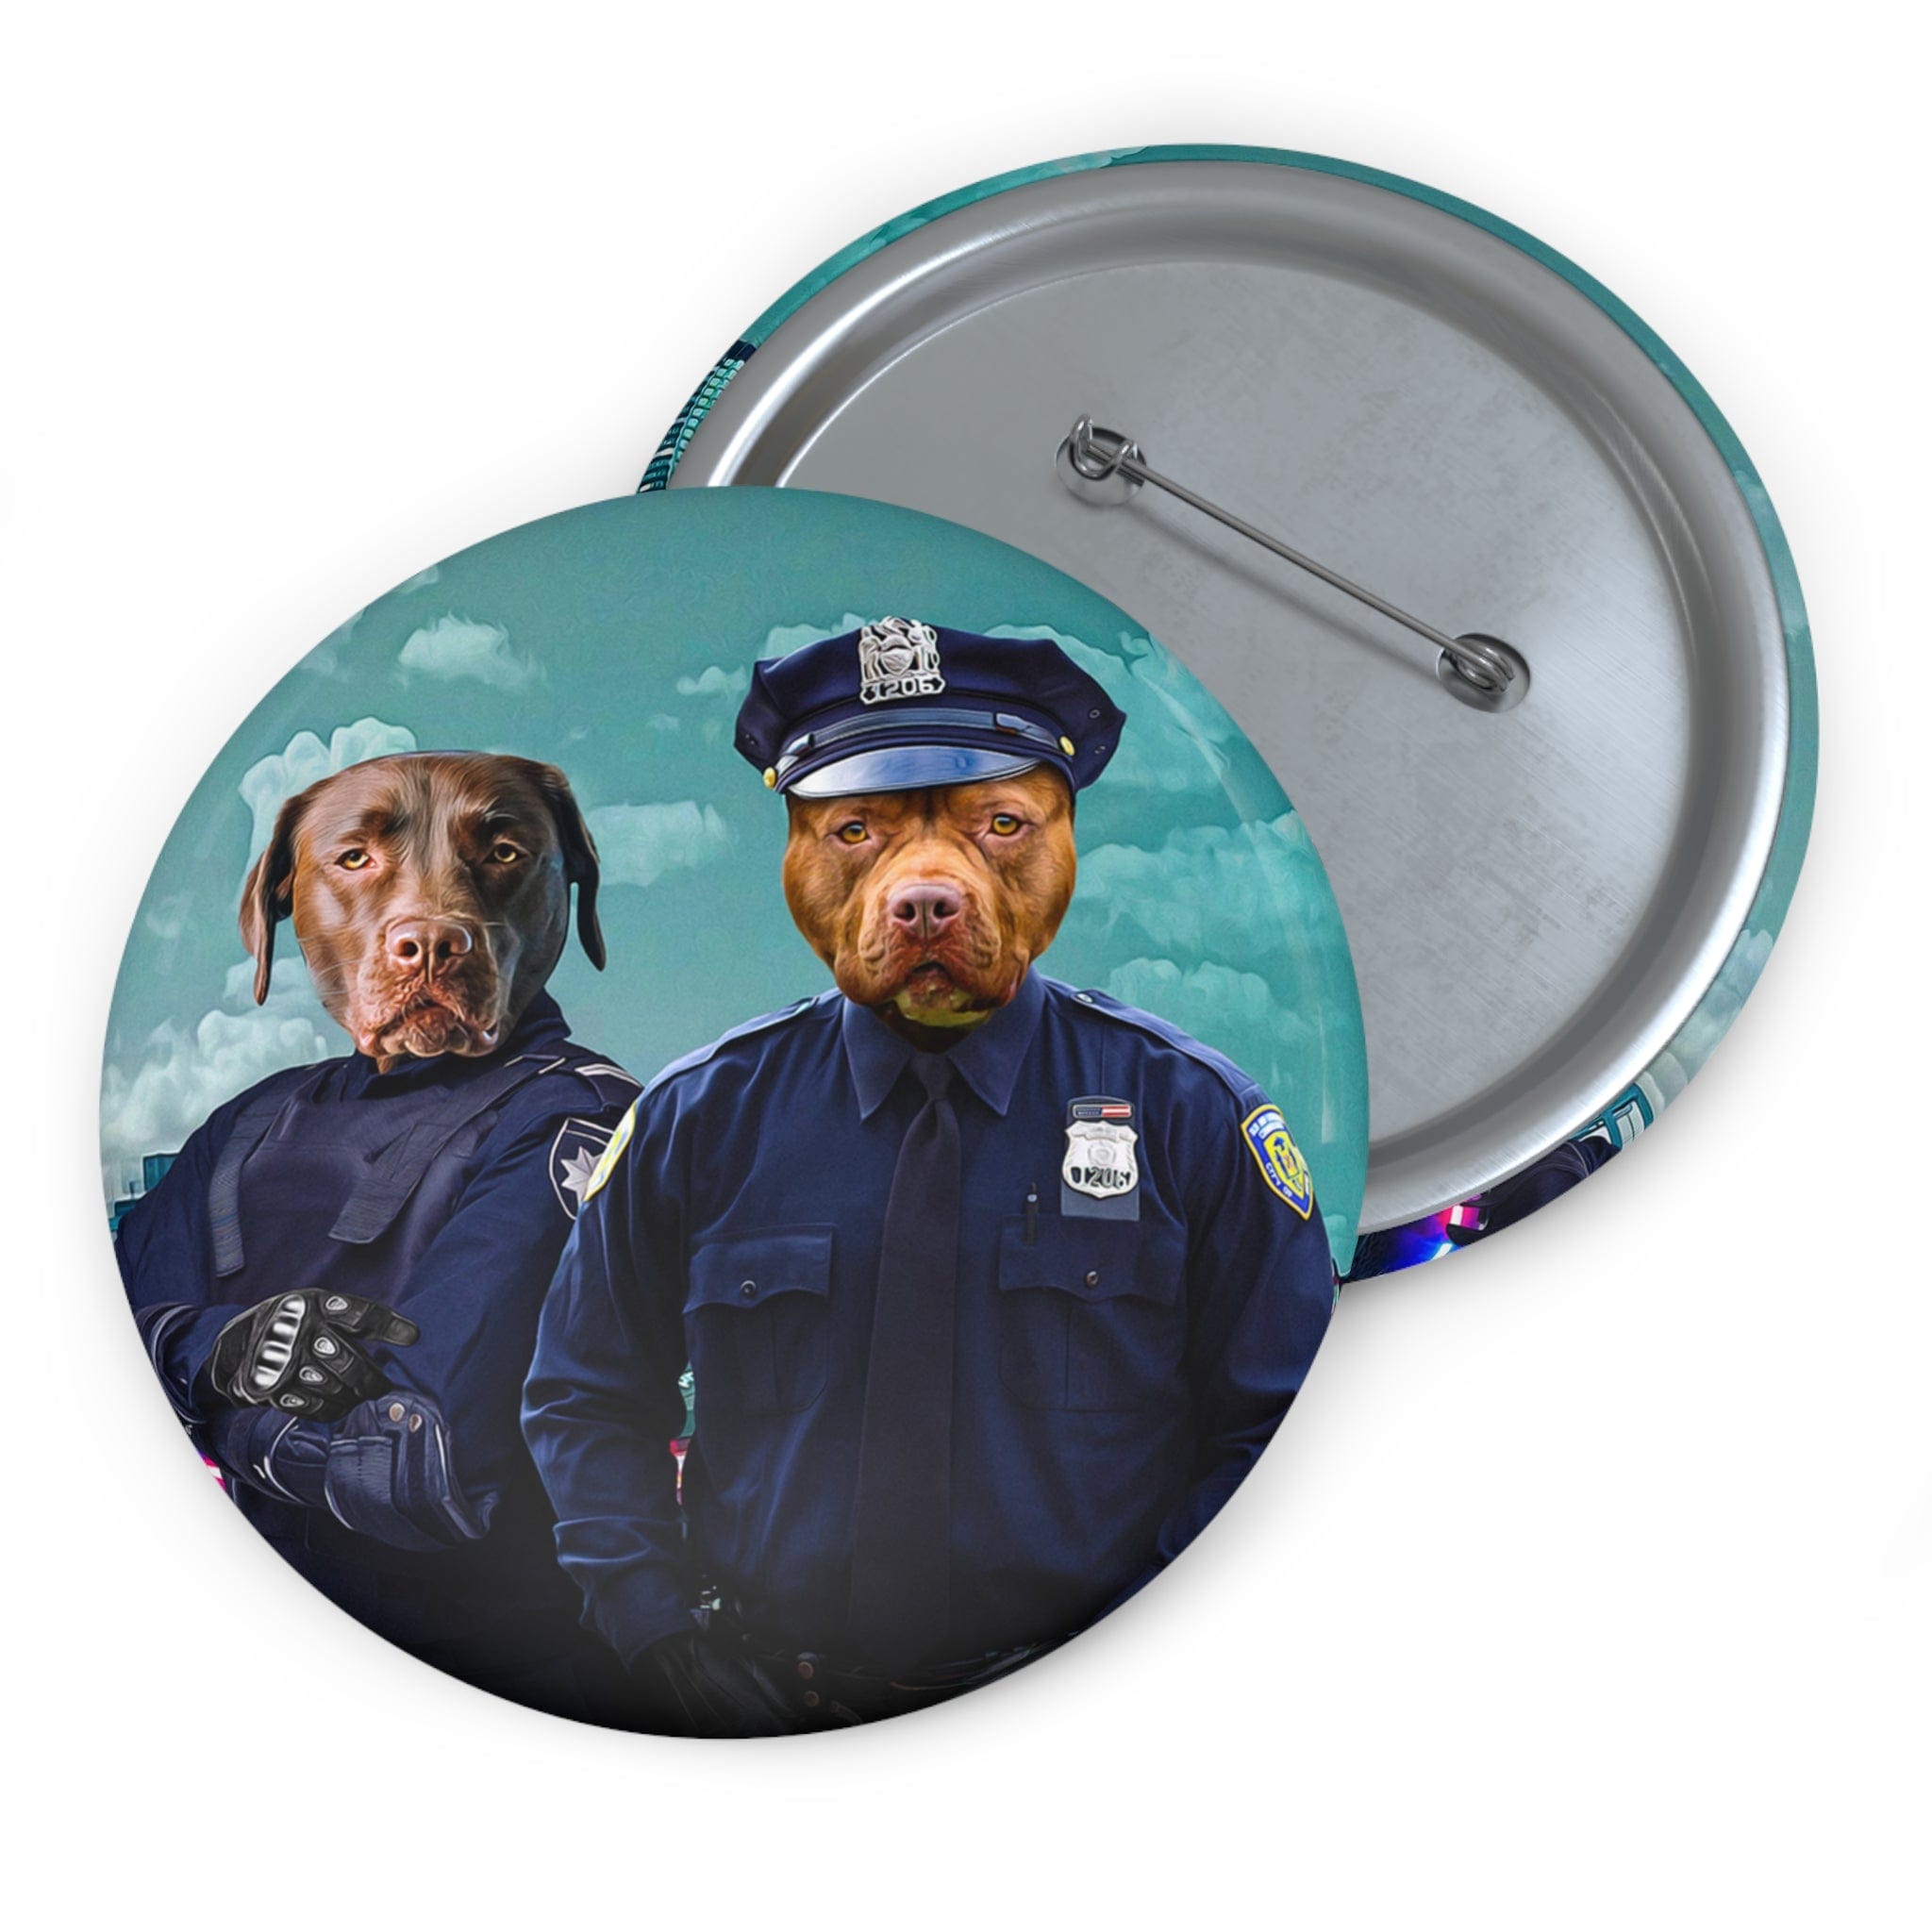 The Police Officer(s) ( 1 - 3 Pets) Custom Pin